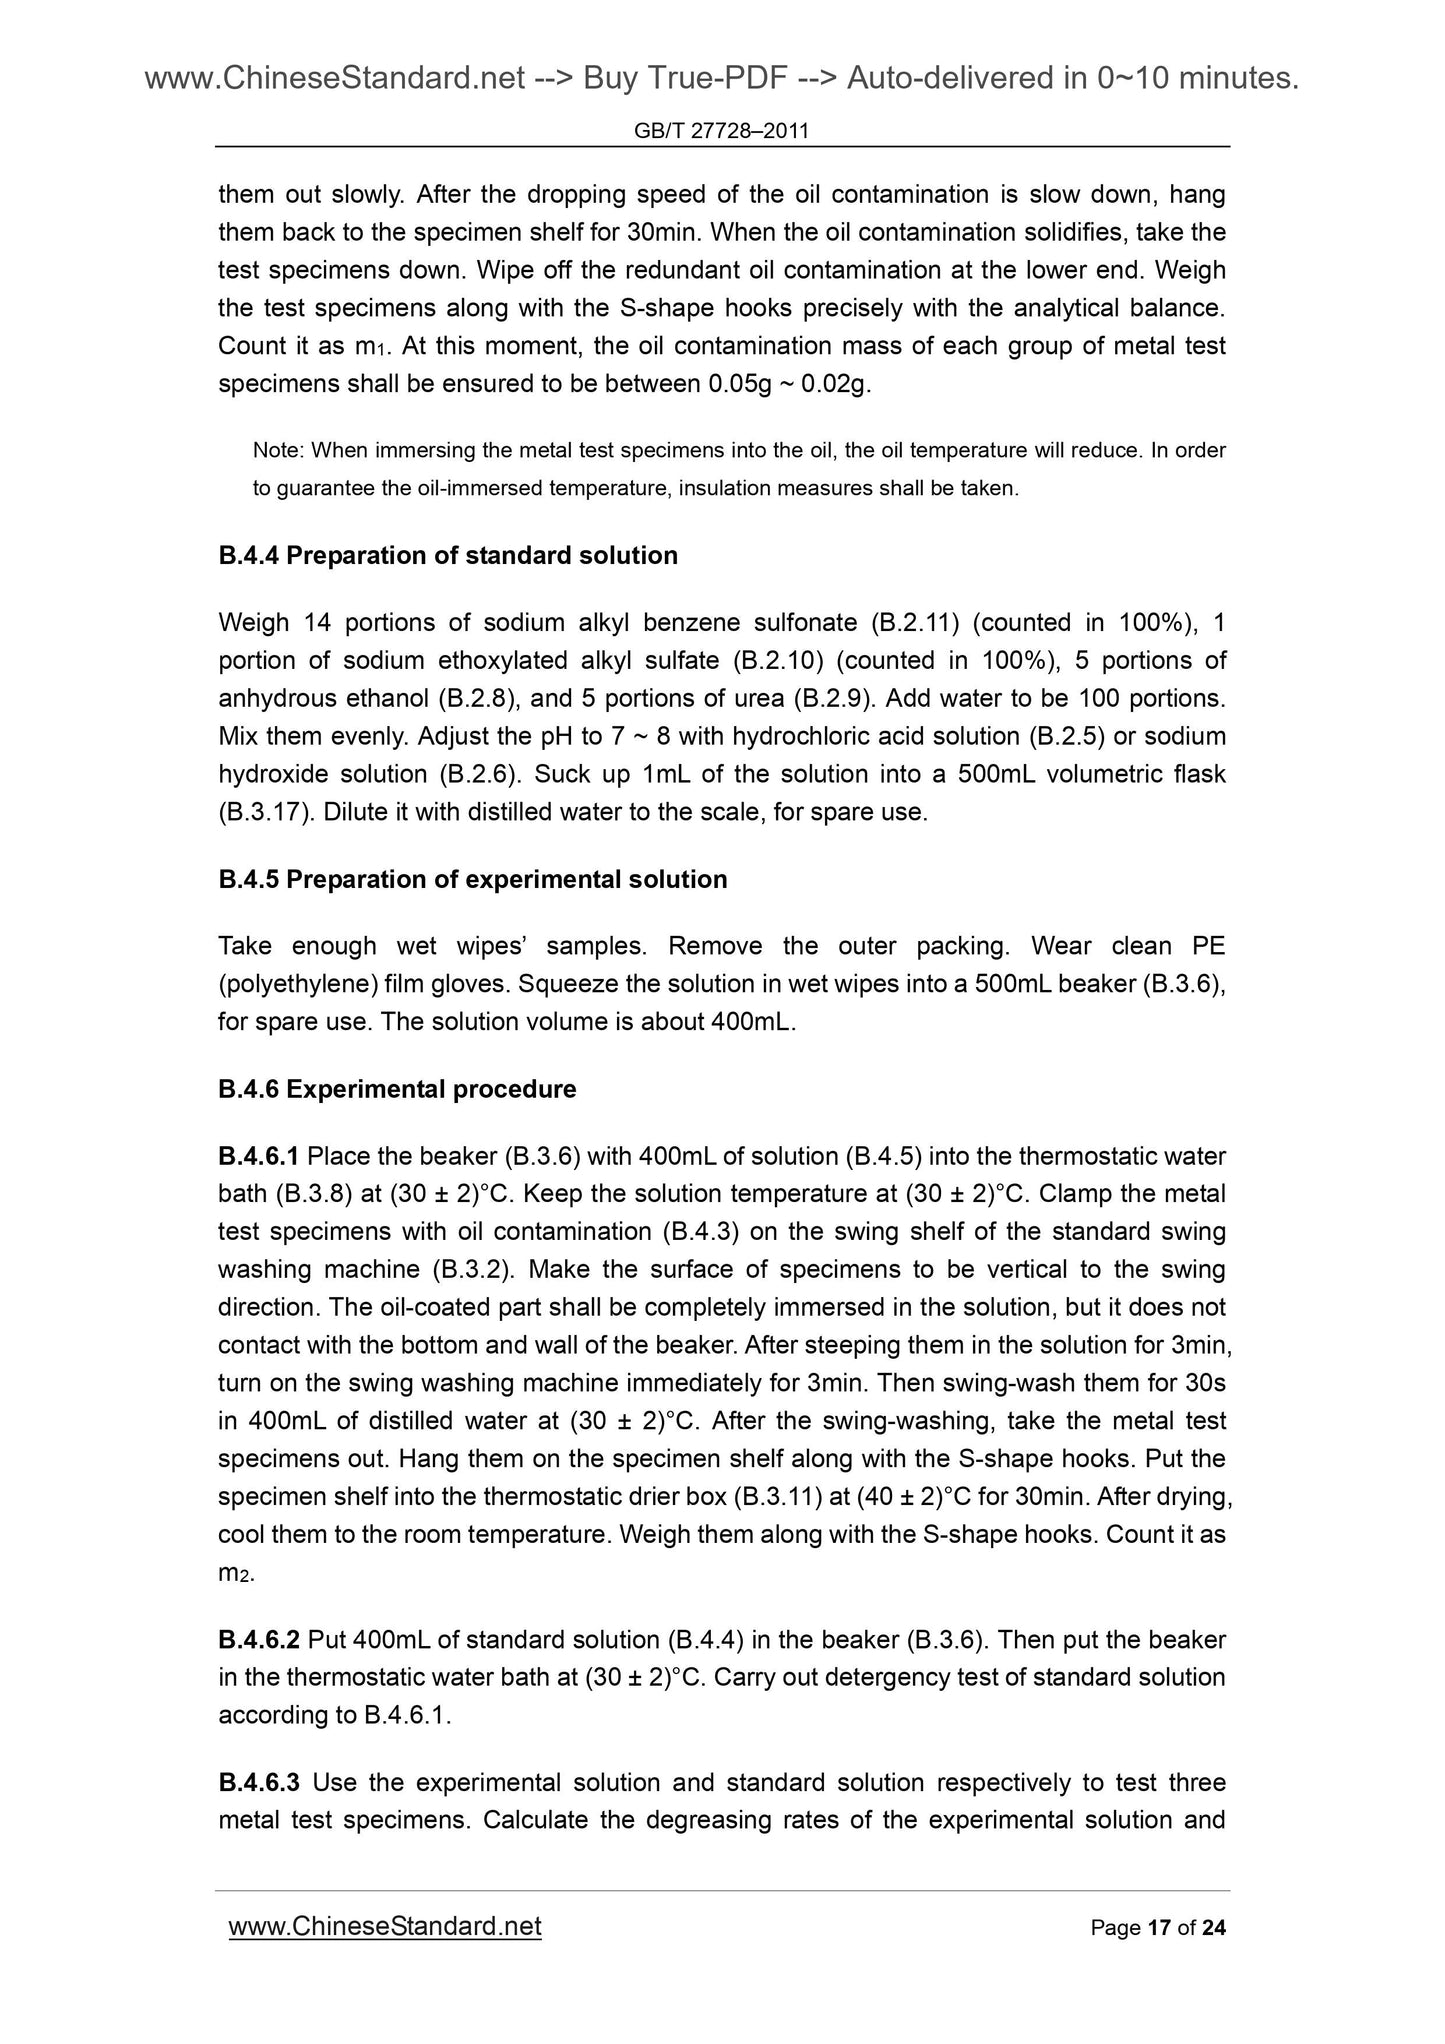 GB/T 27728-2011 Page 8